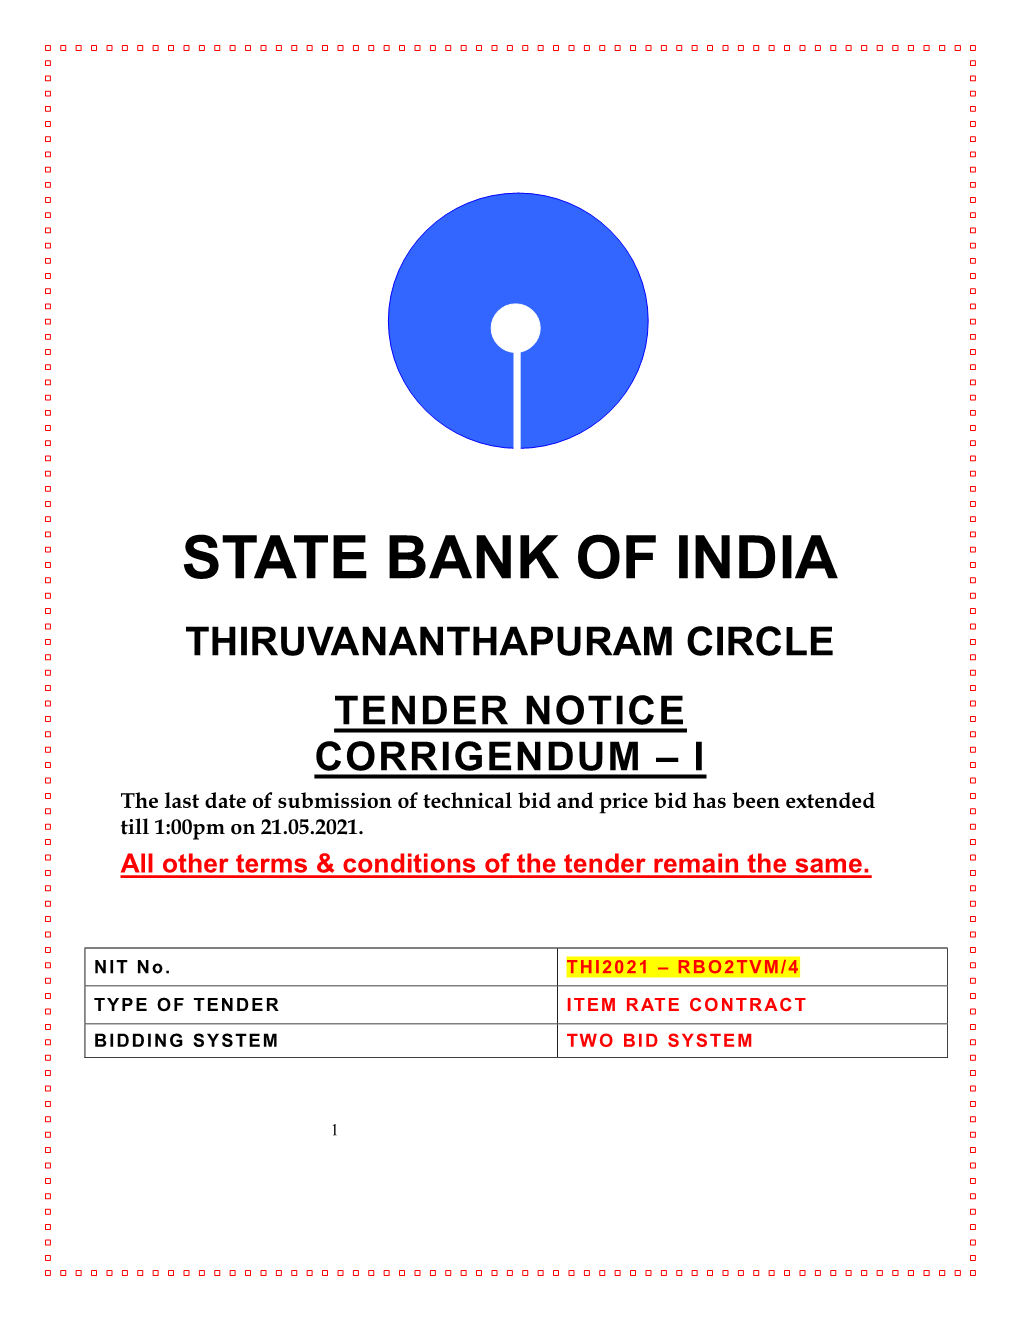 CORRIGENDUM – I the Last Date of Submission of Technical Bid and Price Bid Has Been Extended Till 1:00Pm on 21.05.2021